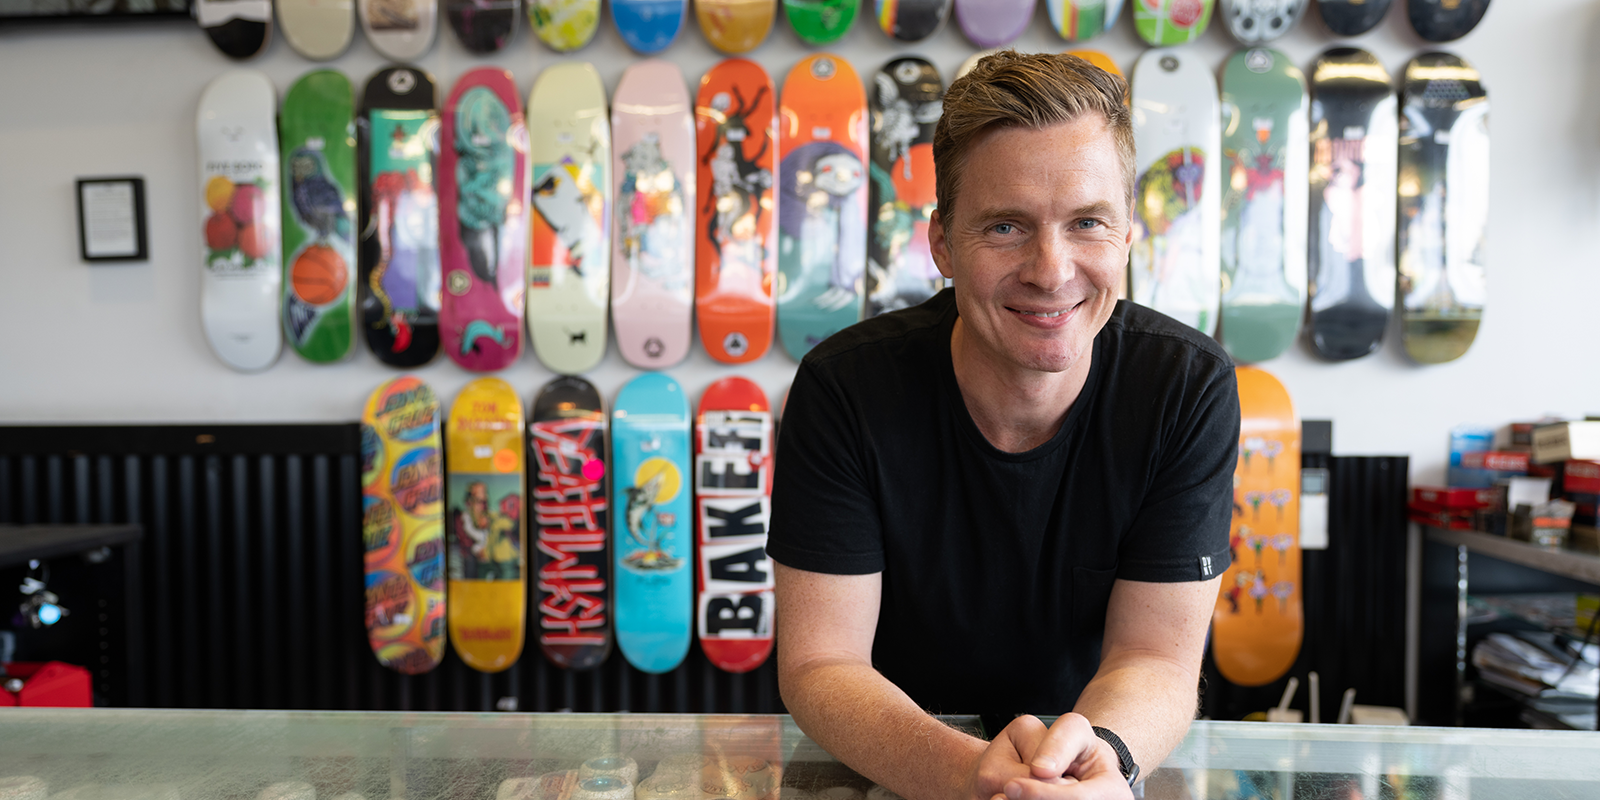 local trader leaning on glass cabinet with wall of skateboards behind him